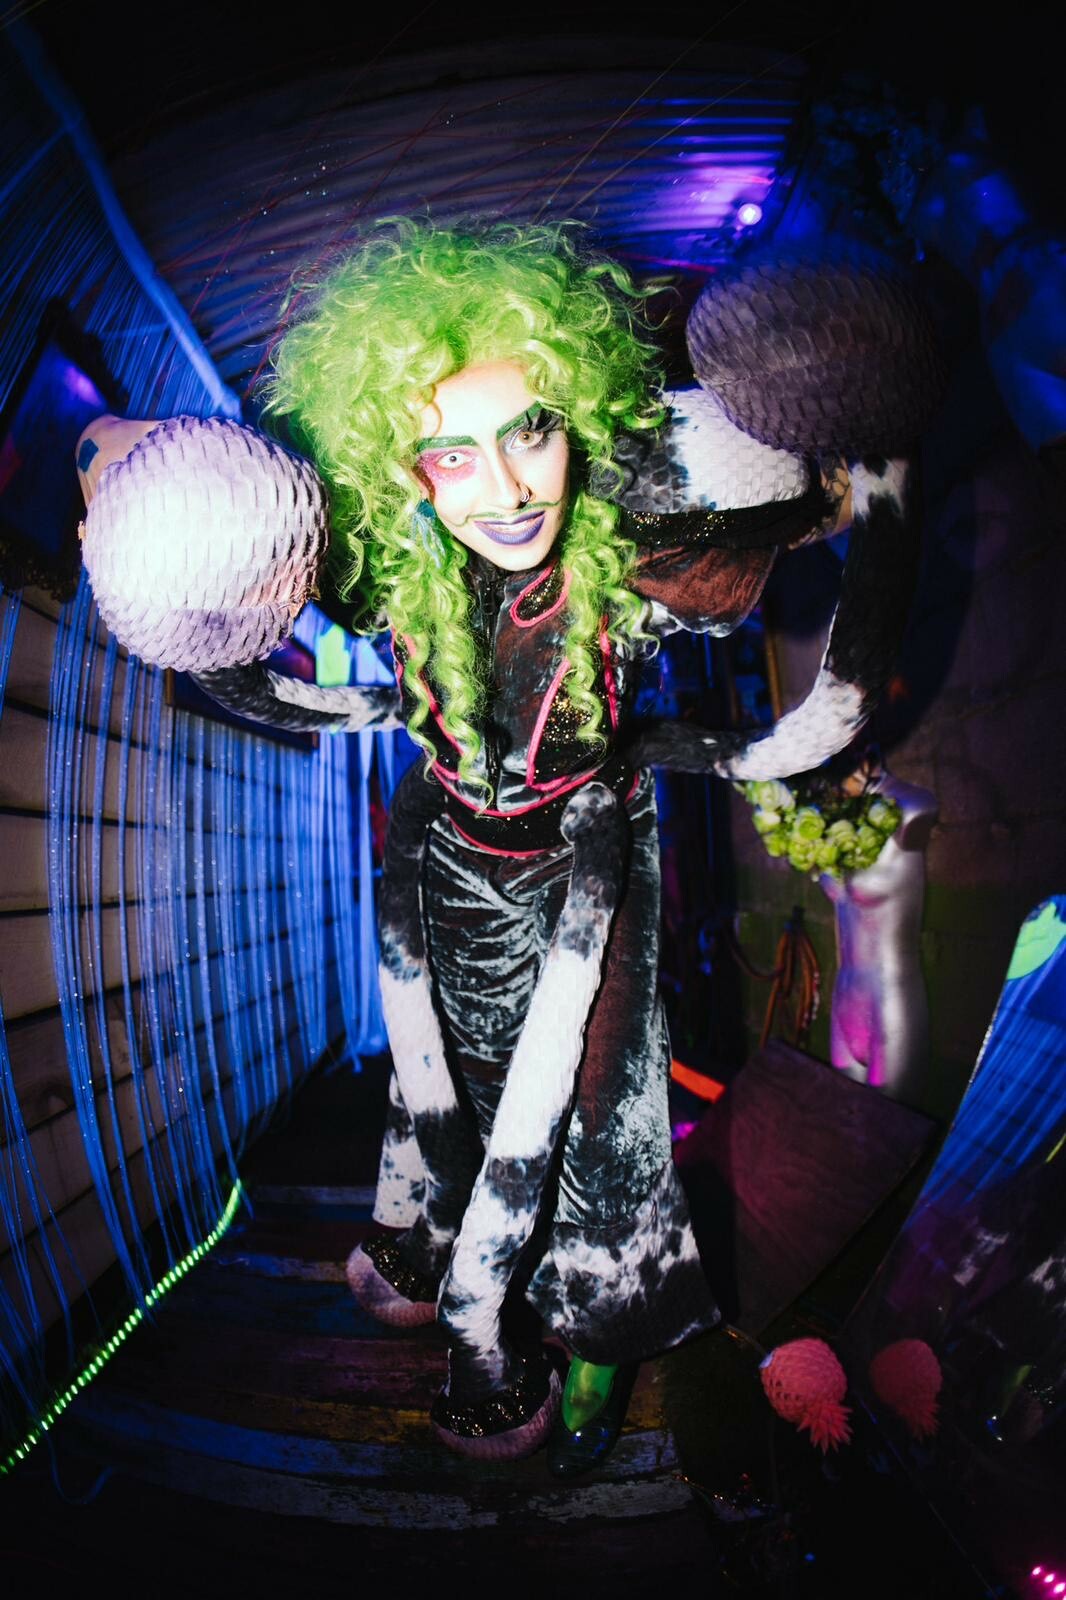 A drag performer with a green wig.